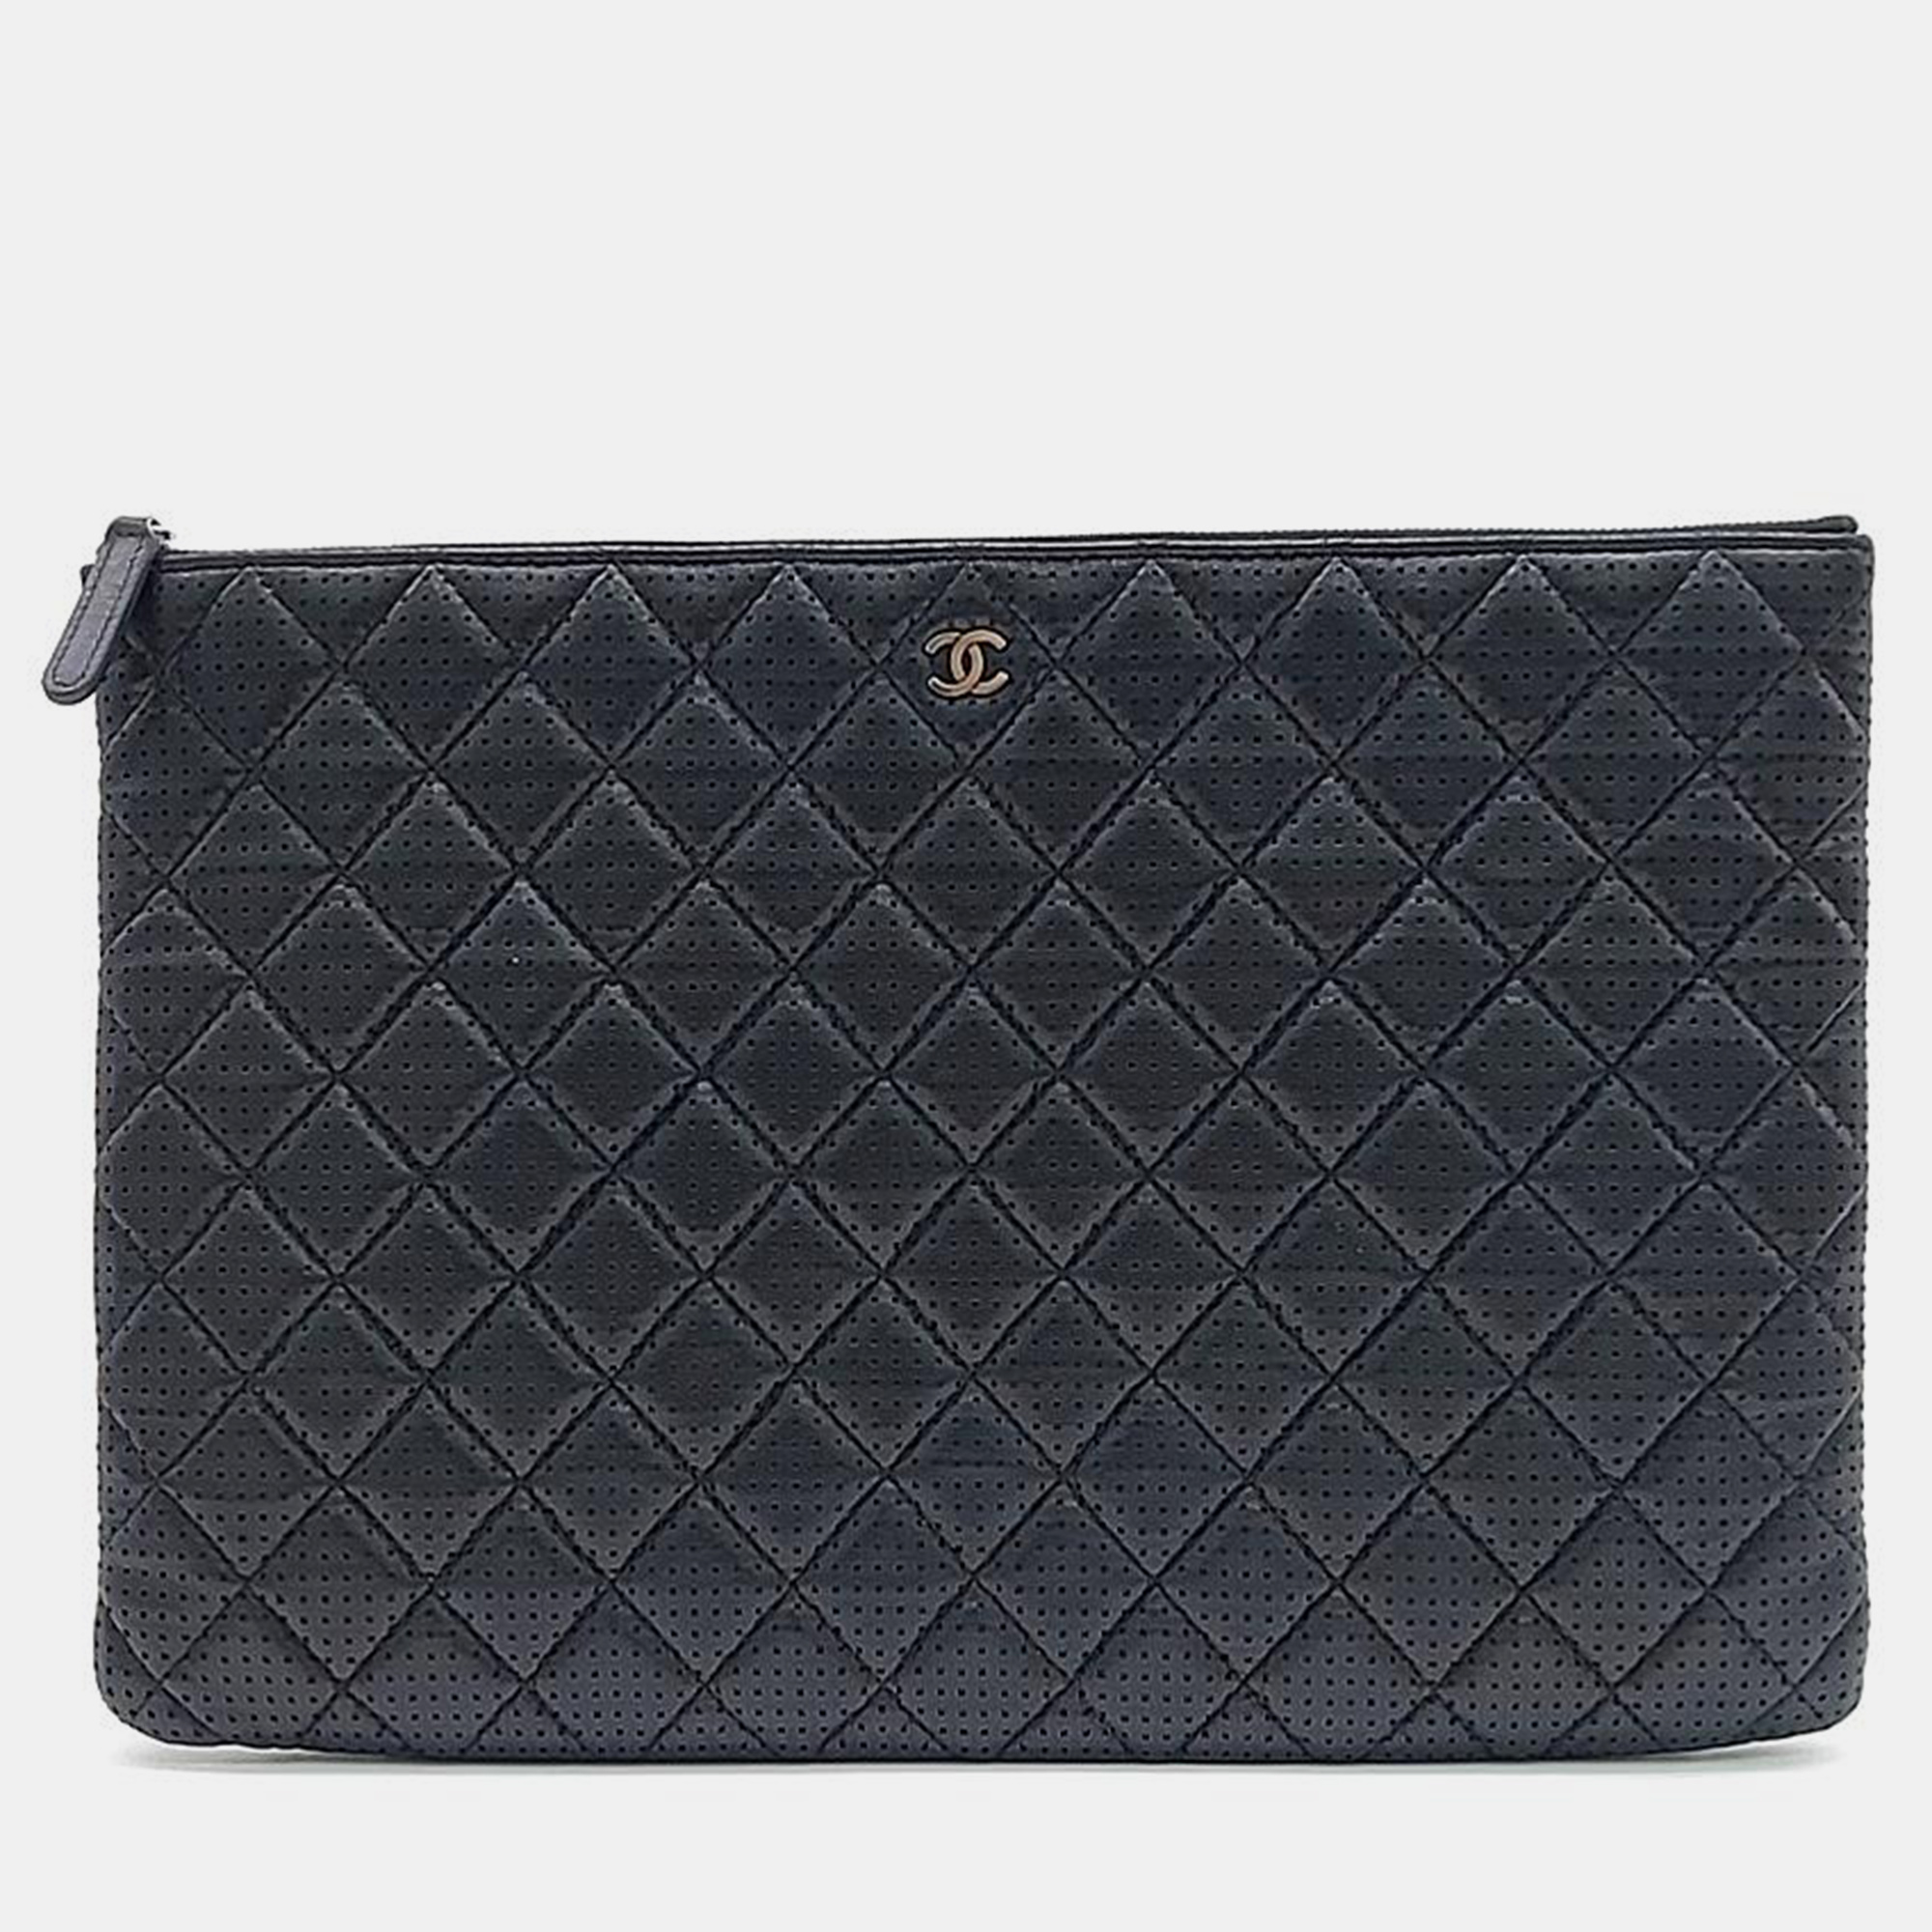 Chanel black perforated leather large clutch bag